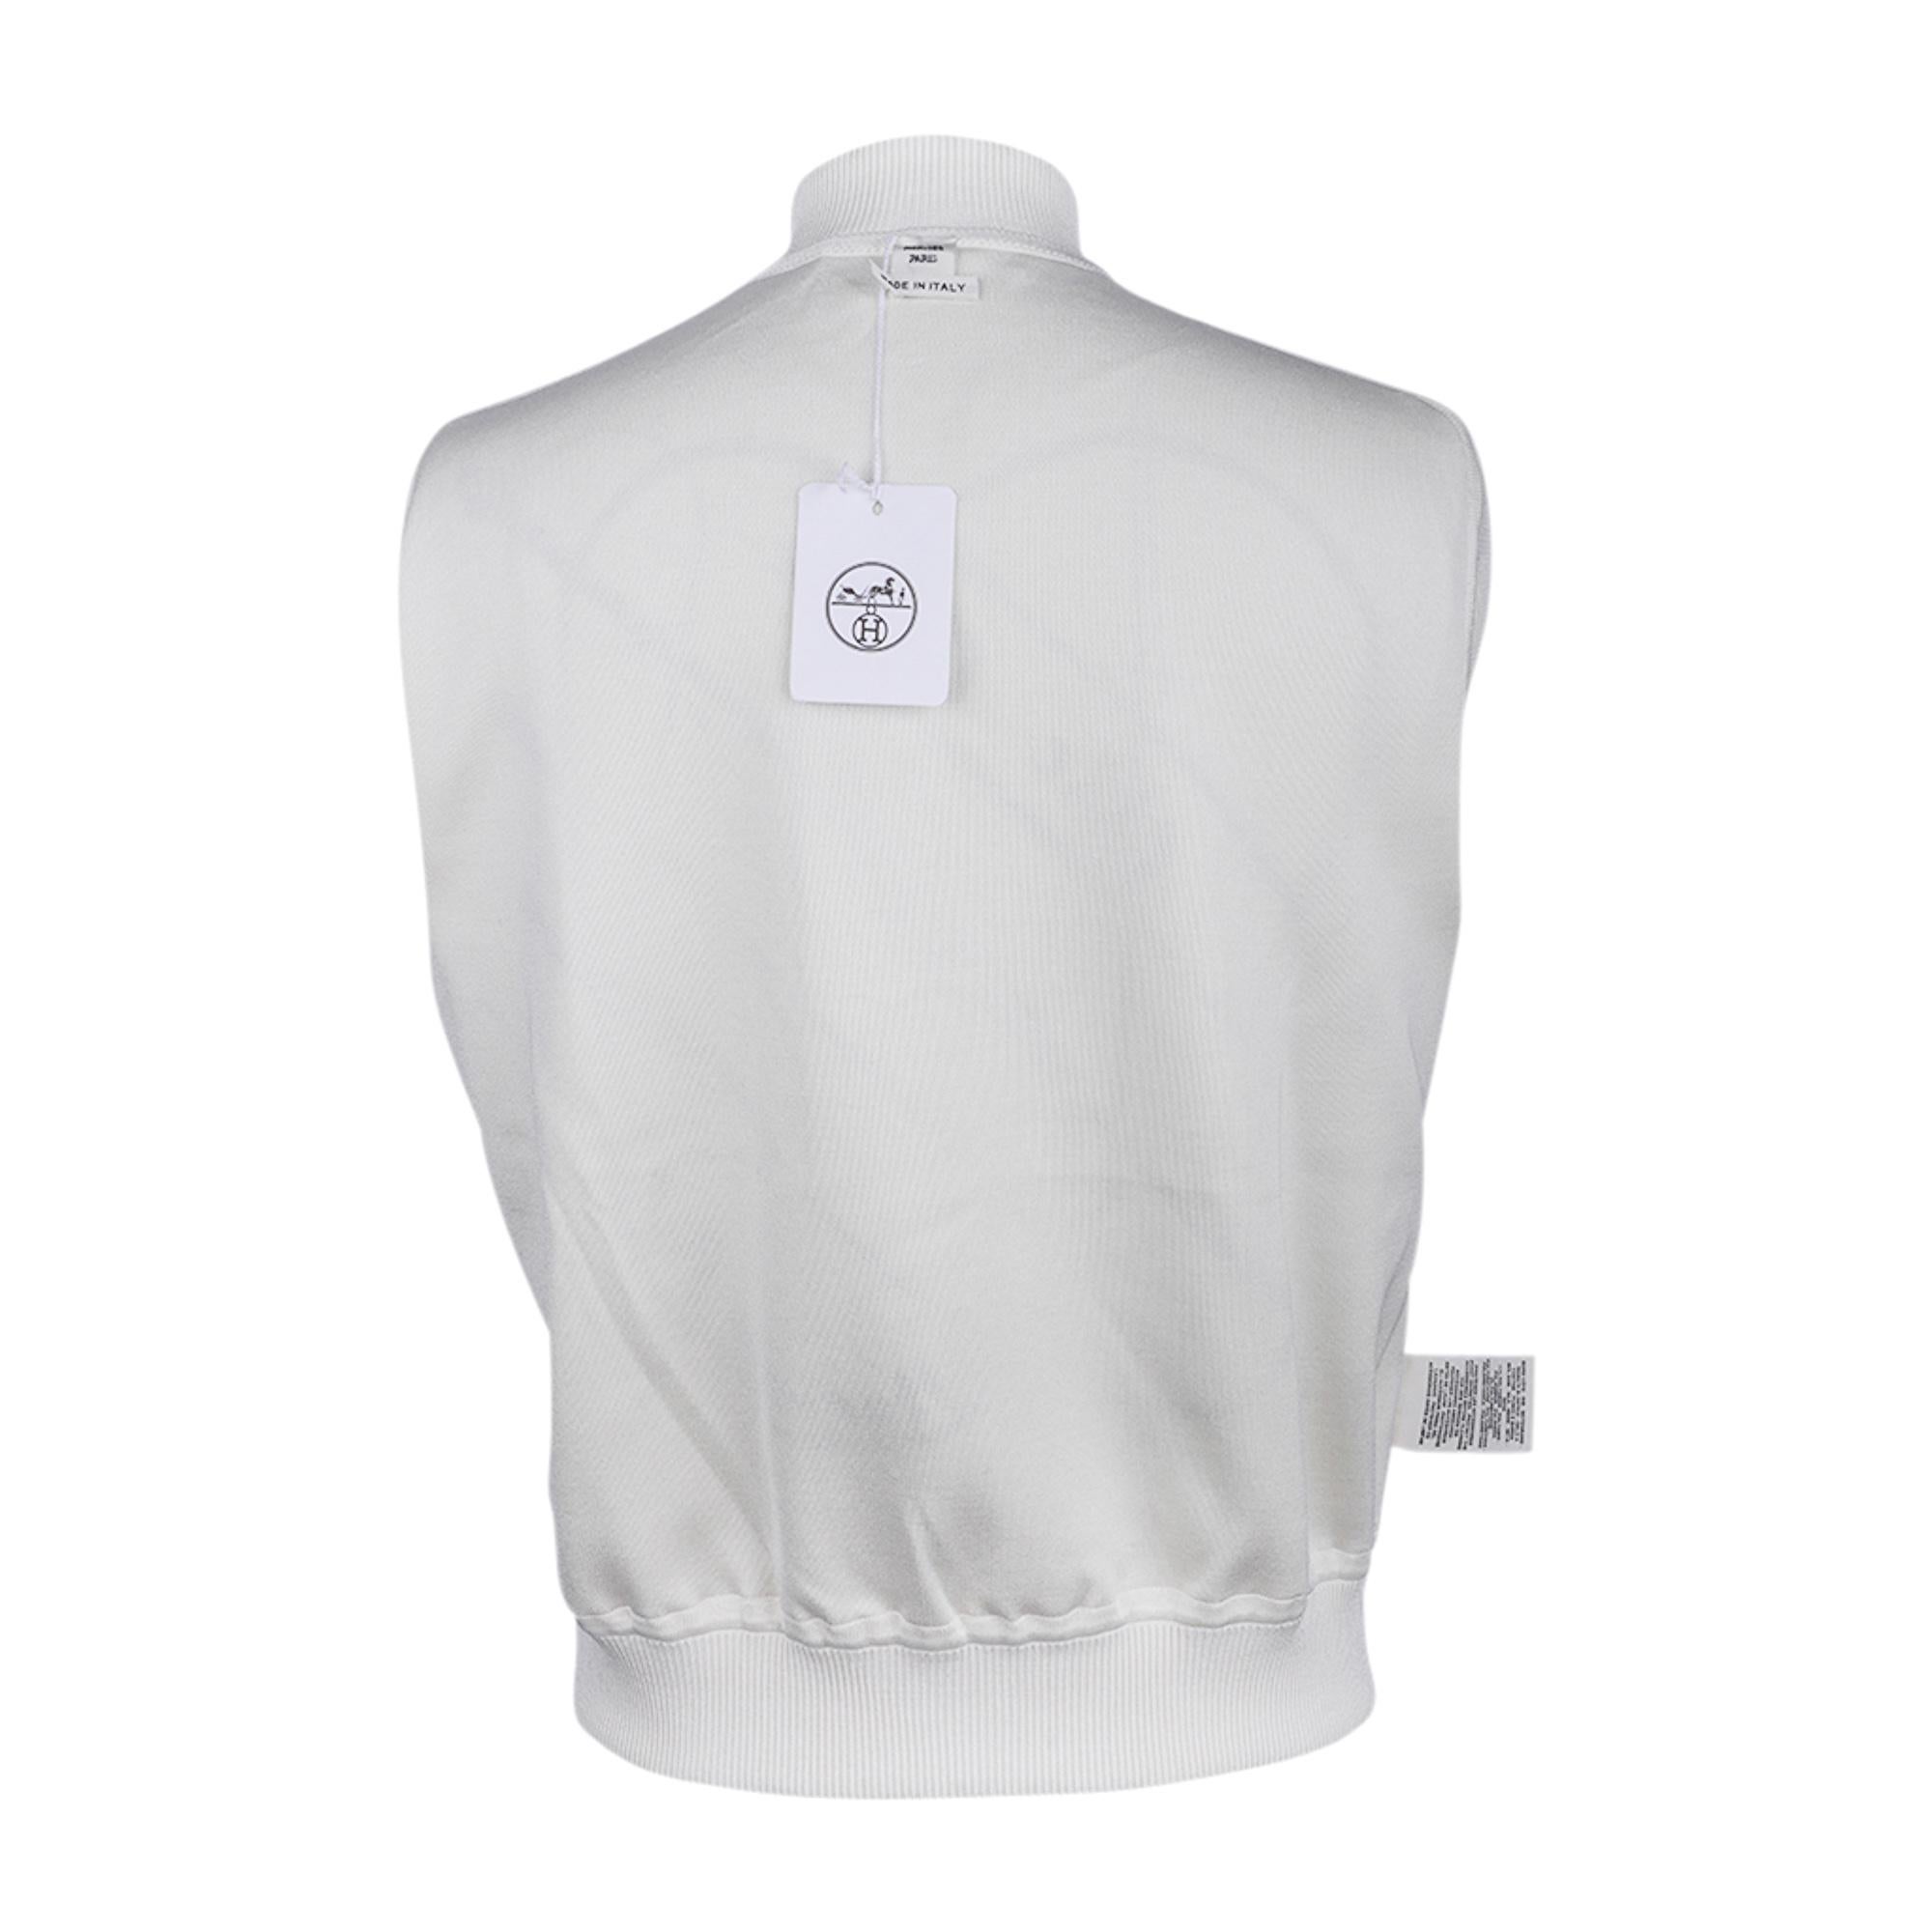 Hermes Cardigan Zip Clic Clac Winter White Jacket 38 / 6 For Sale 7